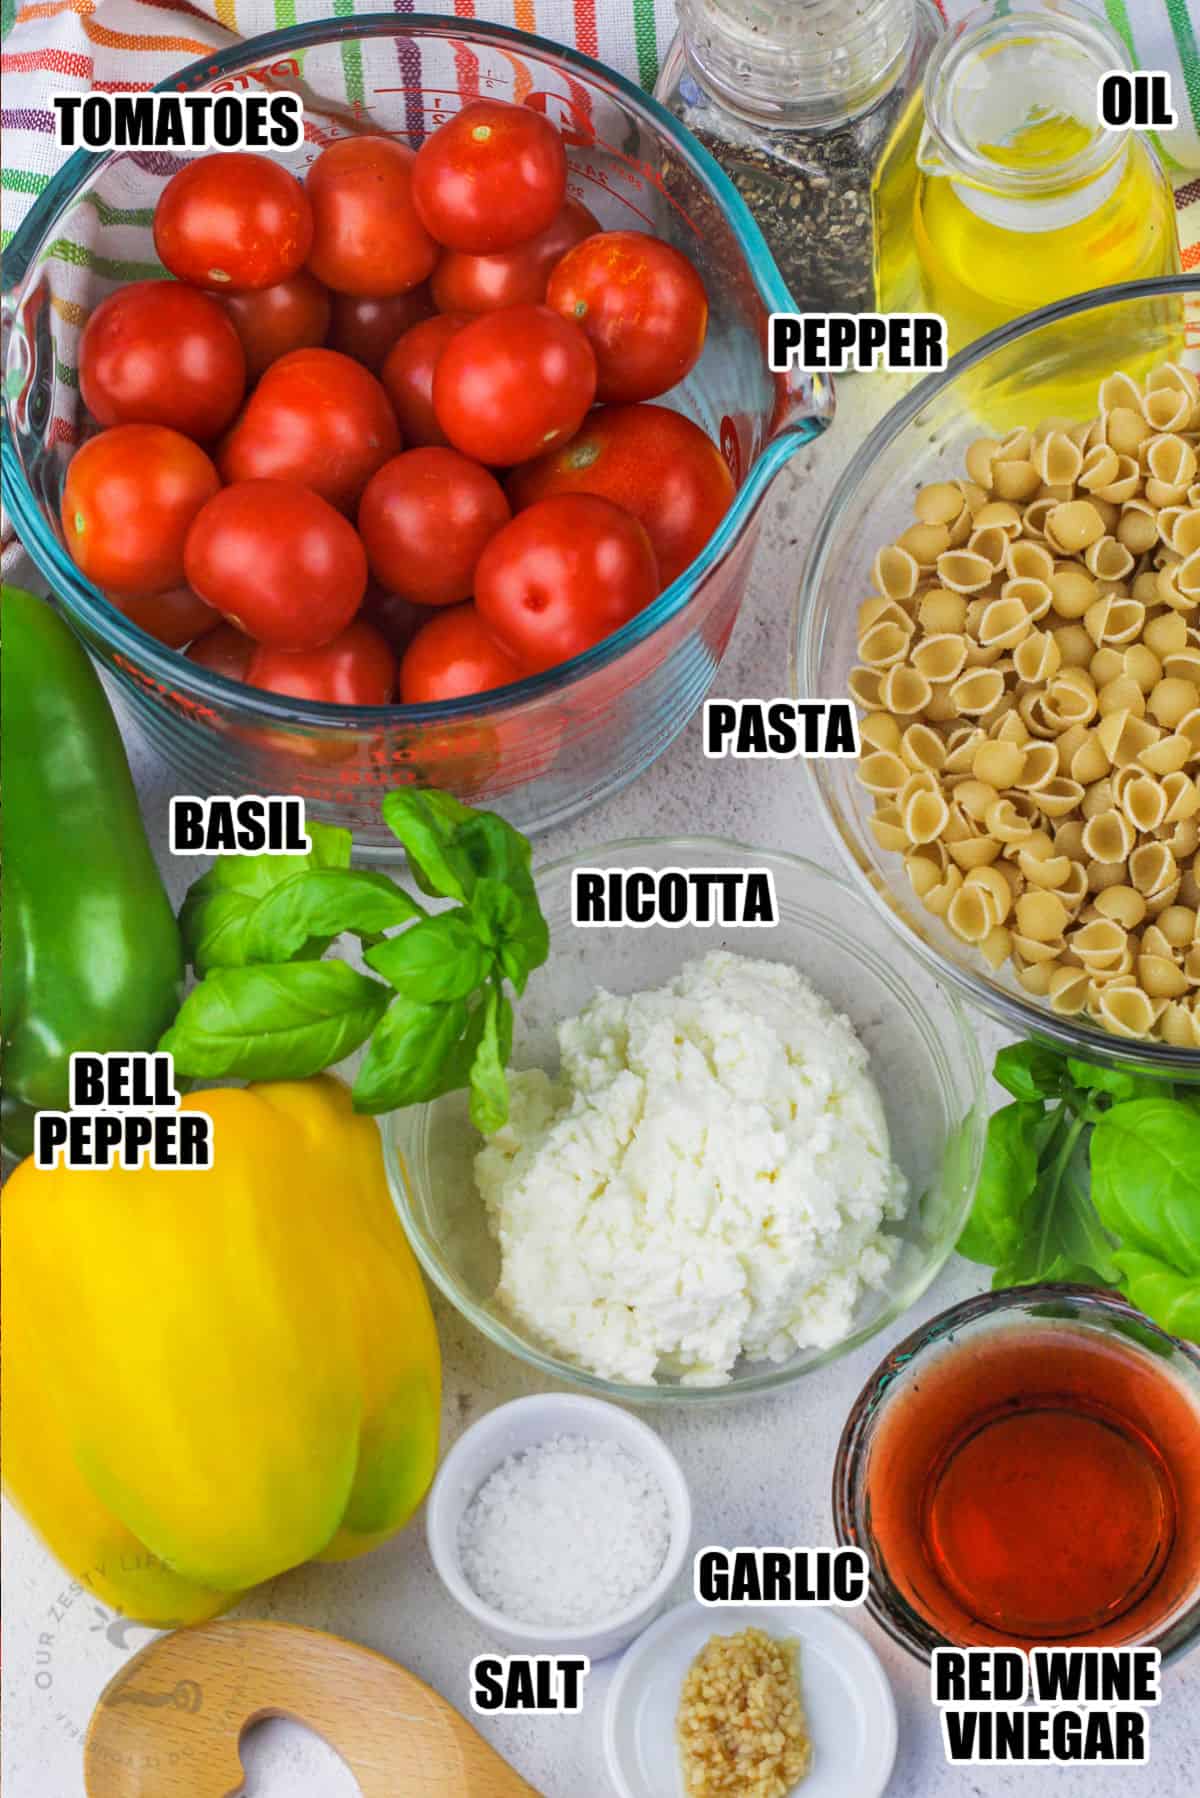 tomatoes , pepper , pasta , oil , basil , ricotta , bell pepper , salt , garlic , and red wine vinegar with labels to make No Cook Tomato Sauce with Pasta